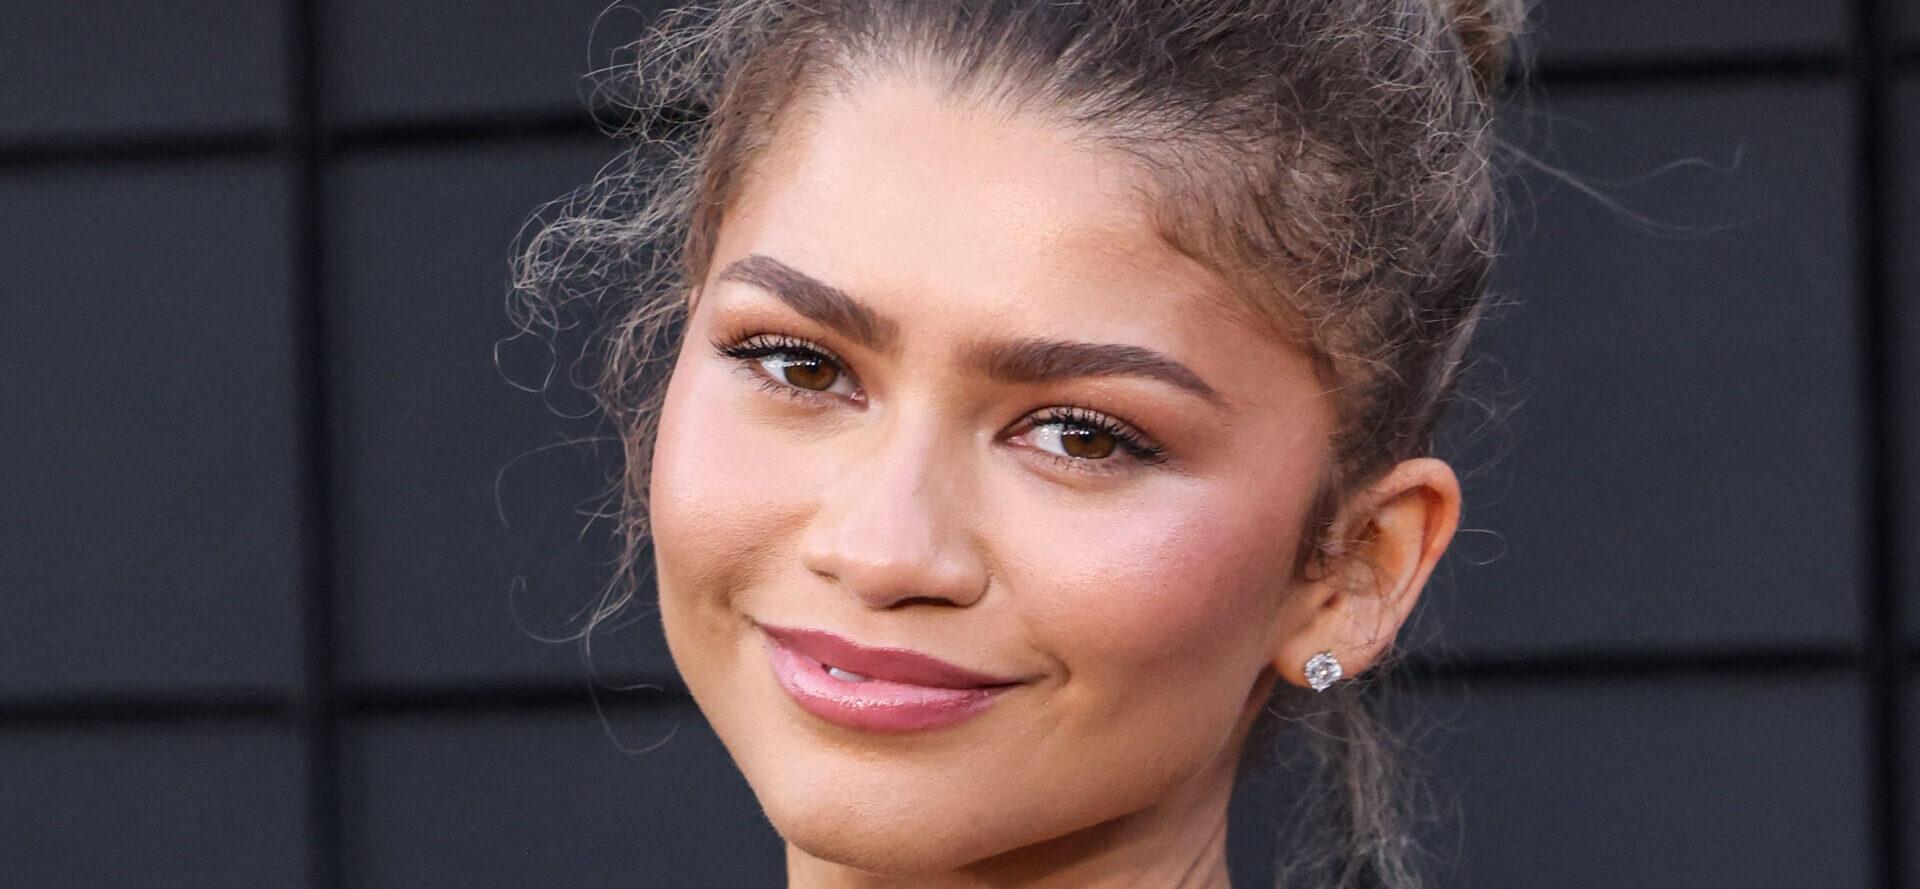 Zendaya's 'Challengers' Already Receiving Oscar Buzz With $6.2M Opening At Box Office